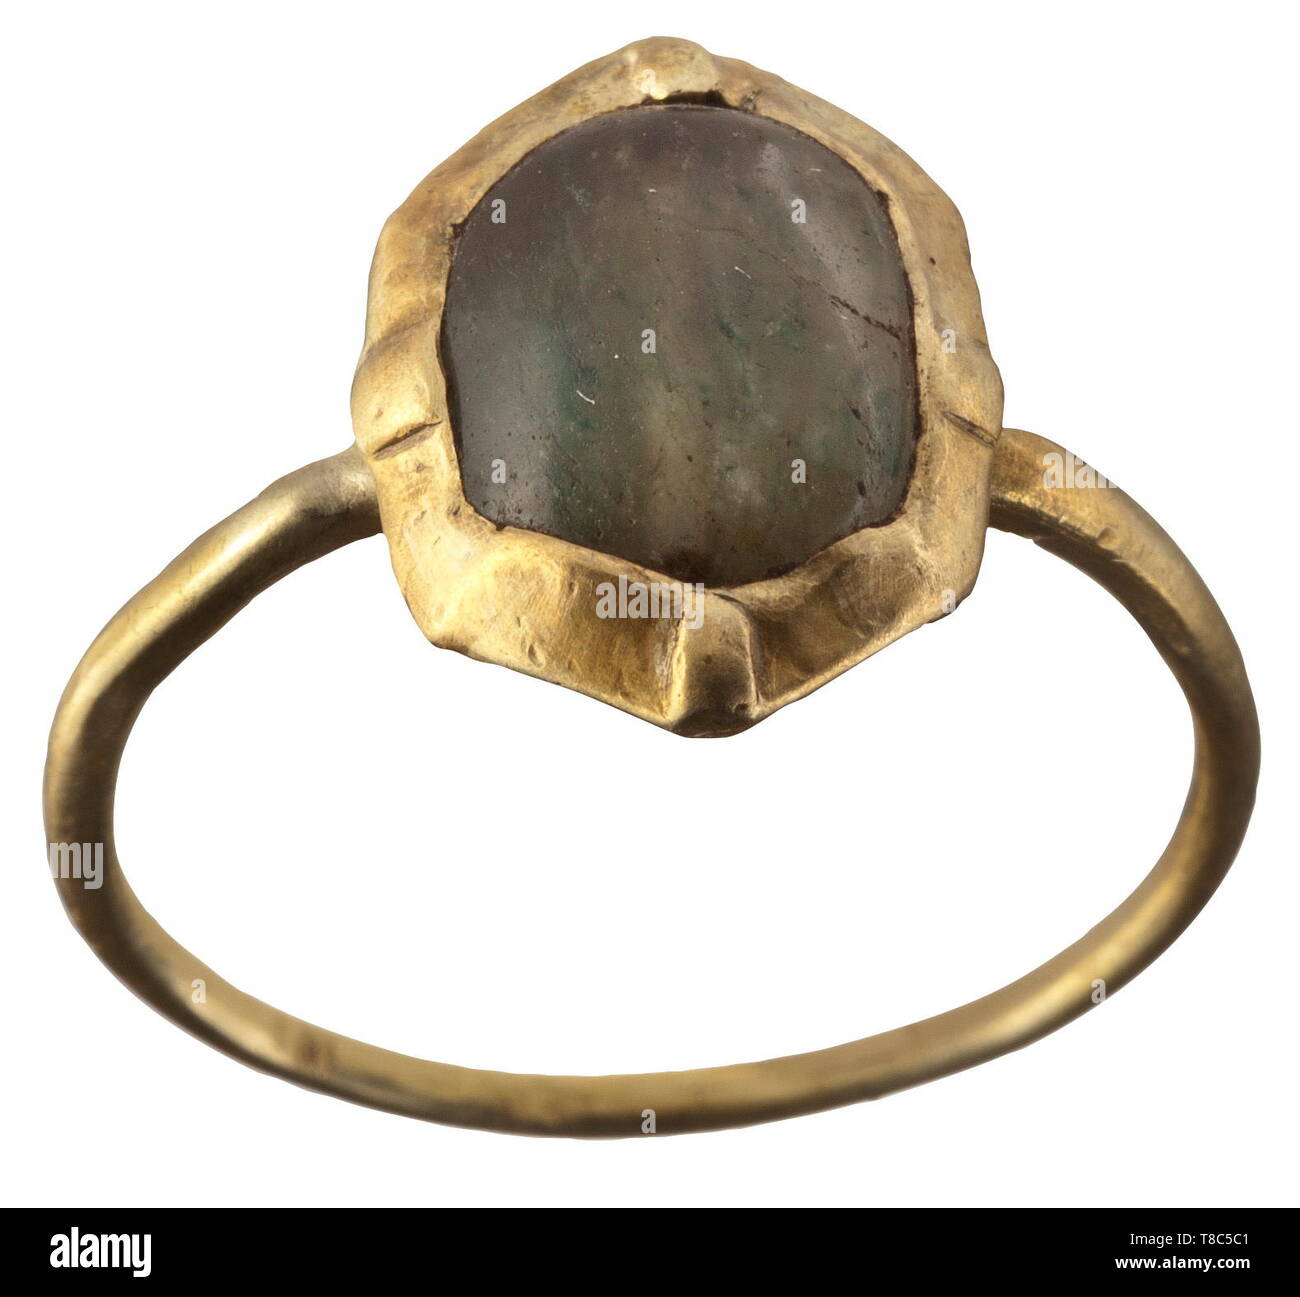 A gold ring, 13th century Thin round band, green gem in a box bezel setting. Width 2.1 cm, weight 2.53 g. historic, historical, handicrafts, handcraft, craft, object, objects, stills, clipping, clippings, cut out, cut-out, cut-outs, middle ages, Additional-Rights-Clearance-Info-Not-Available Stock Photo